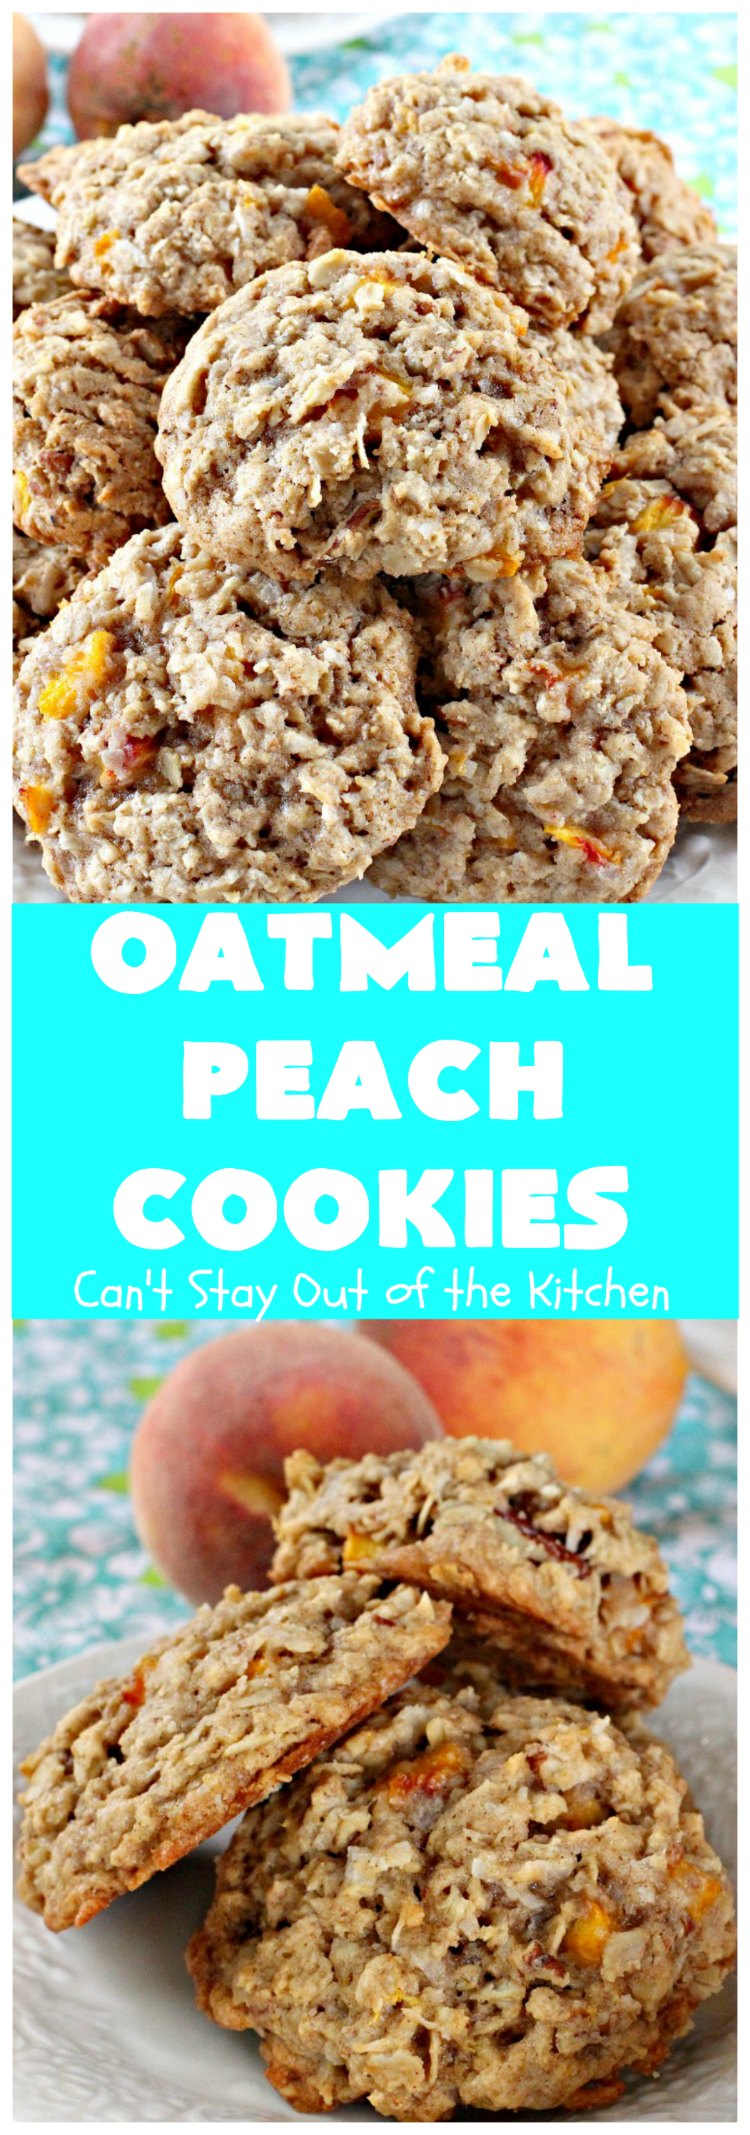 Oatmeal Peach Cookies | Can't Stay Out of the Kitchen